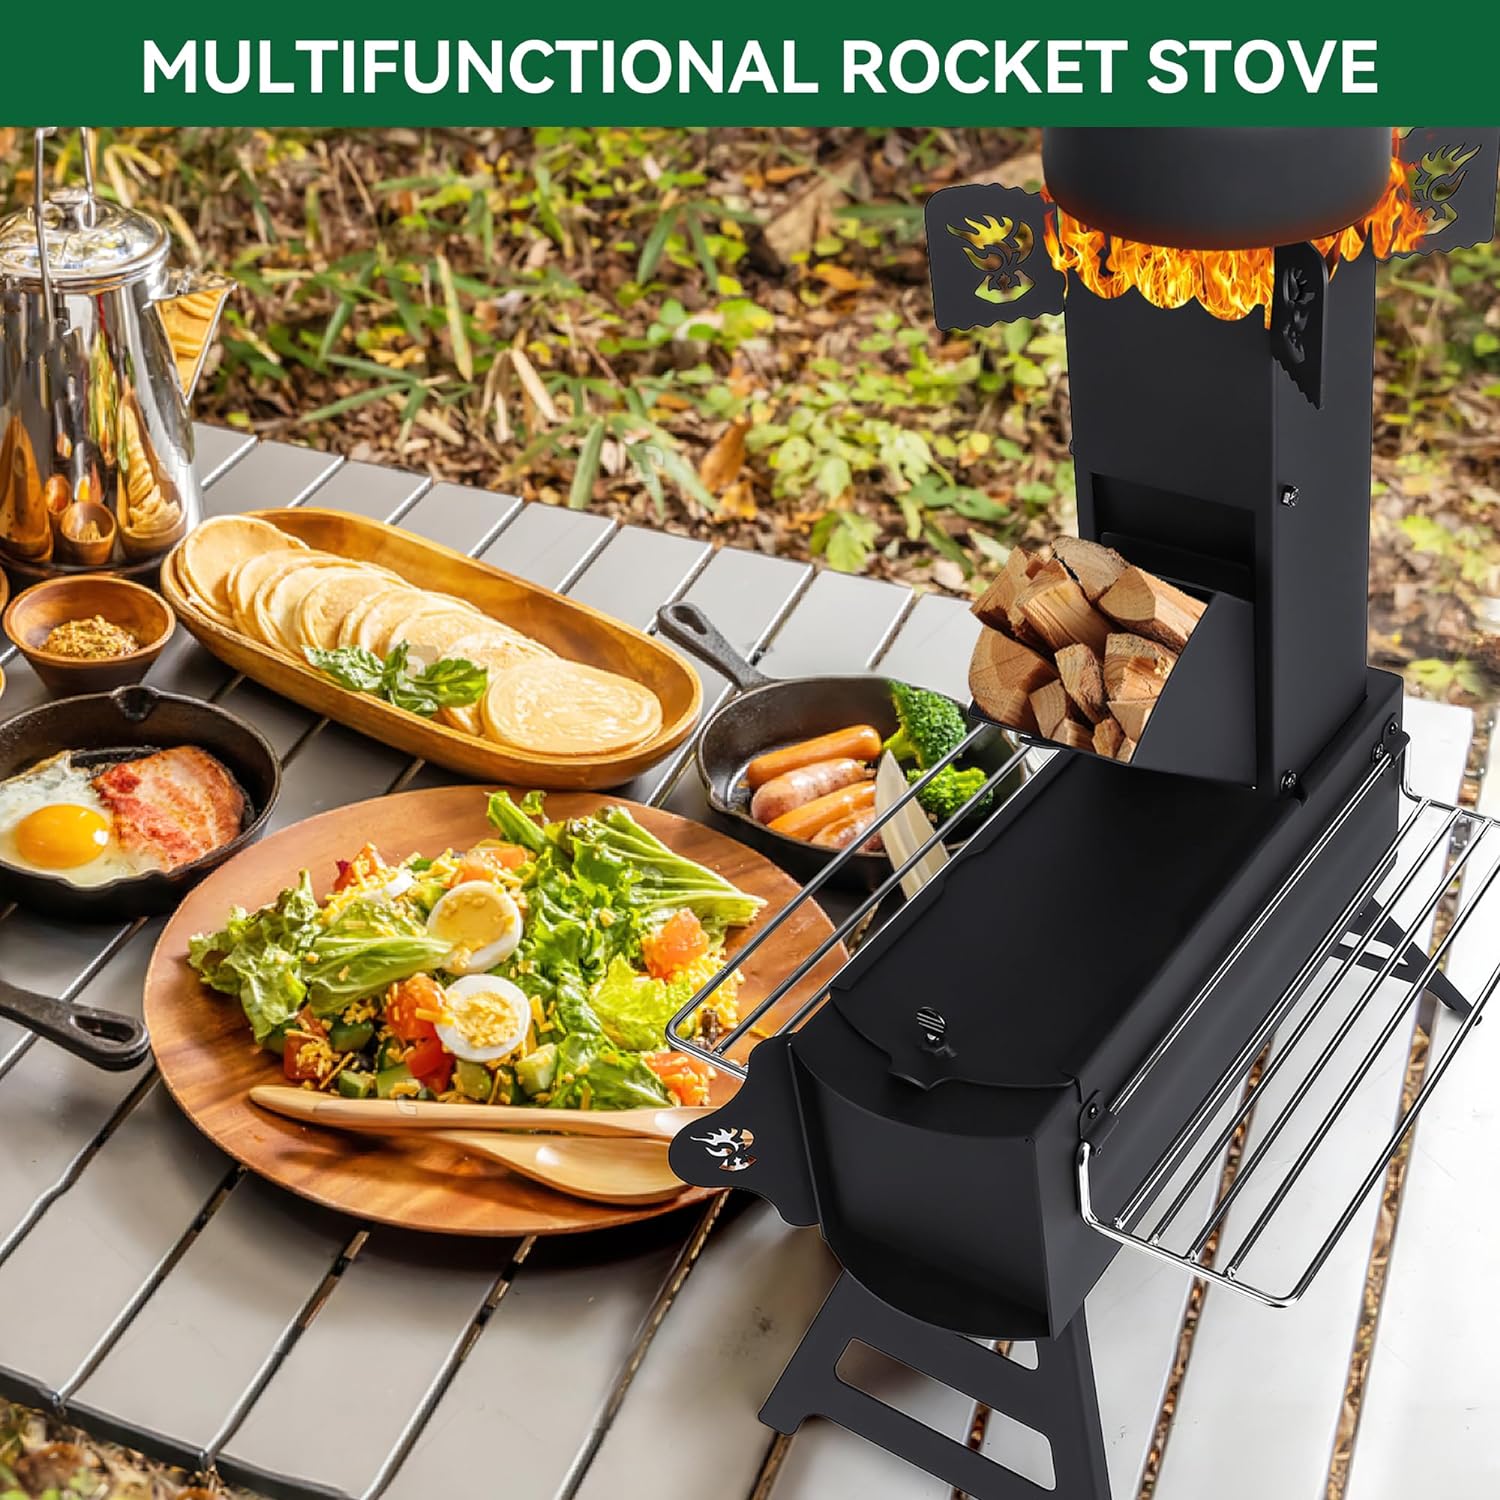 Rocket Stove for Camping,Portable Camping Stove for Cooking Wood Burning,Collapsible Backpacking Wood Stove,Minute Man Rocket Camp Stove, Outdoor Minuteman Cooking Stove, Stove Outdoor